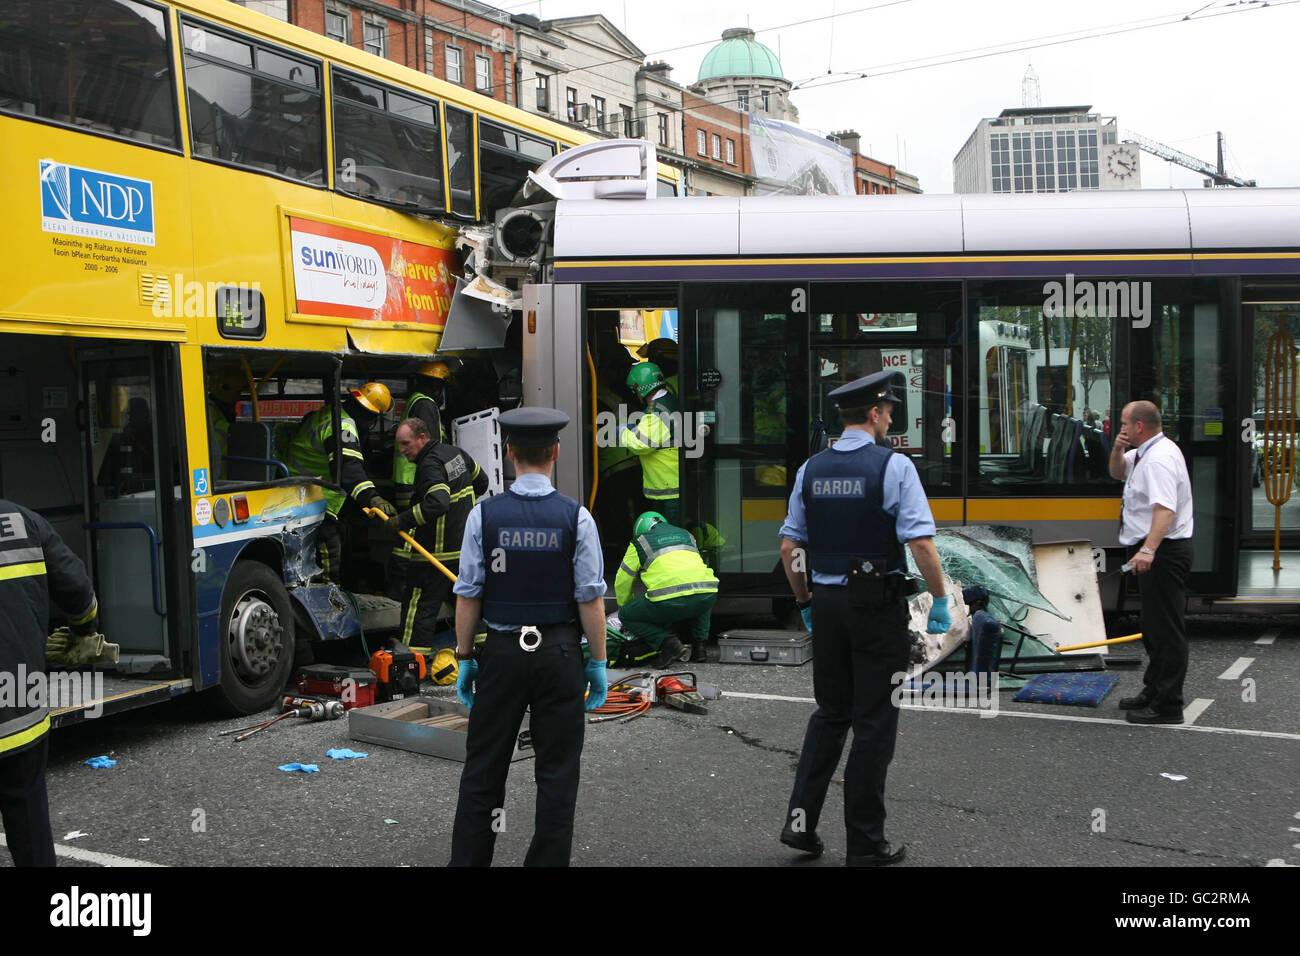 Emergency services at the scene of a crash between a Bus and a Luas tram on Dublin's O'Connell Street. Stock Photo